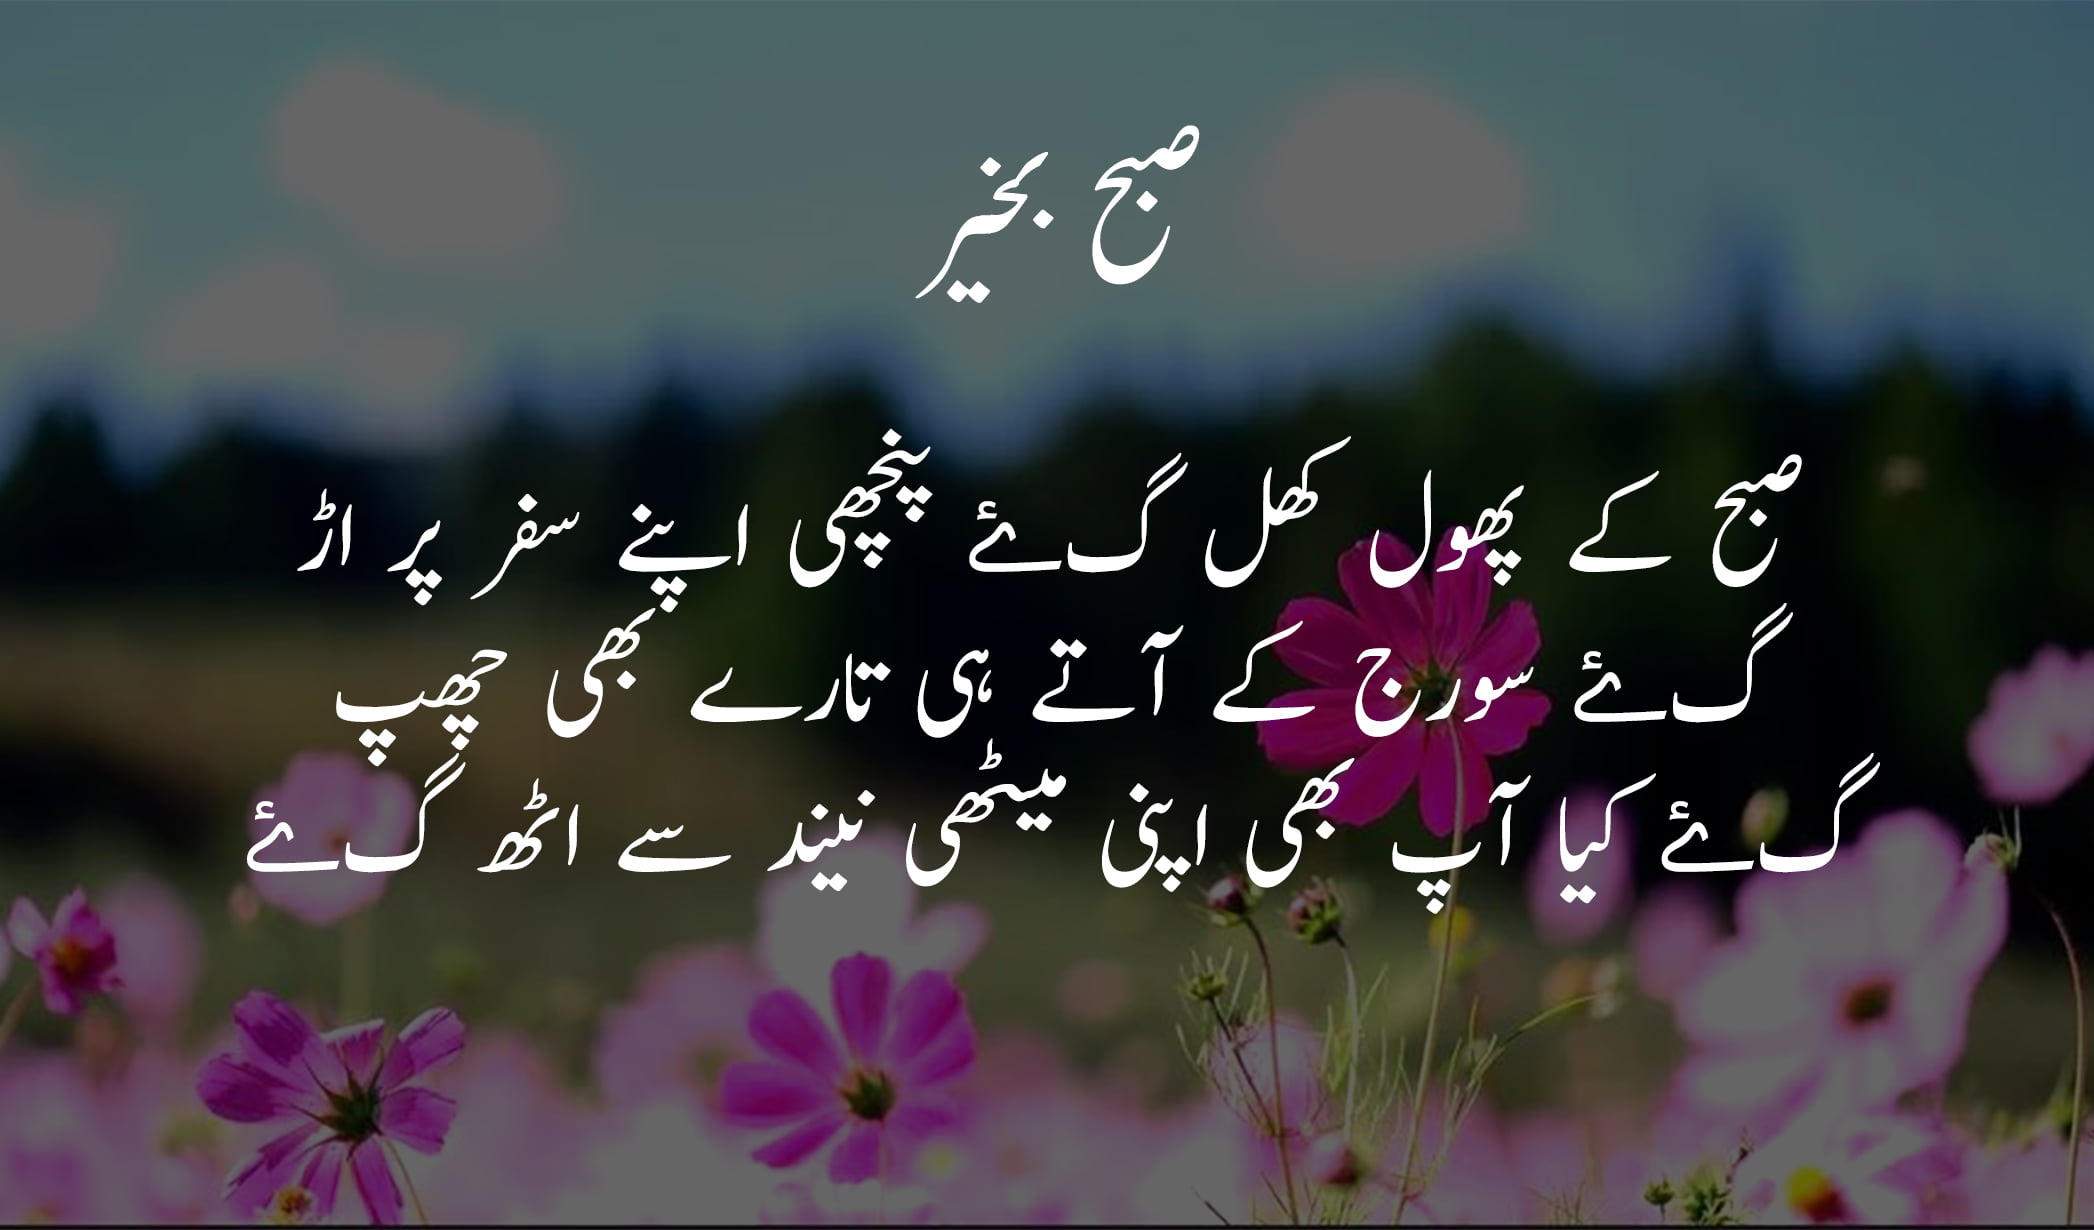 Morning Quotes, Poetry and Wishes in Urdu | صبح بخیر